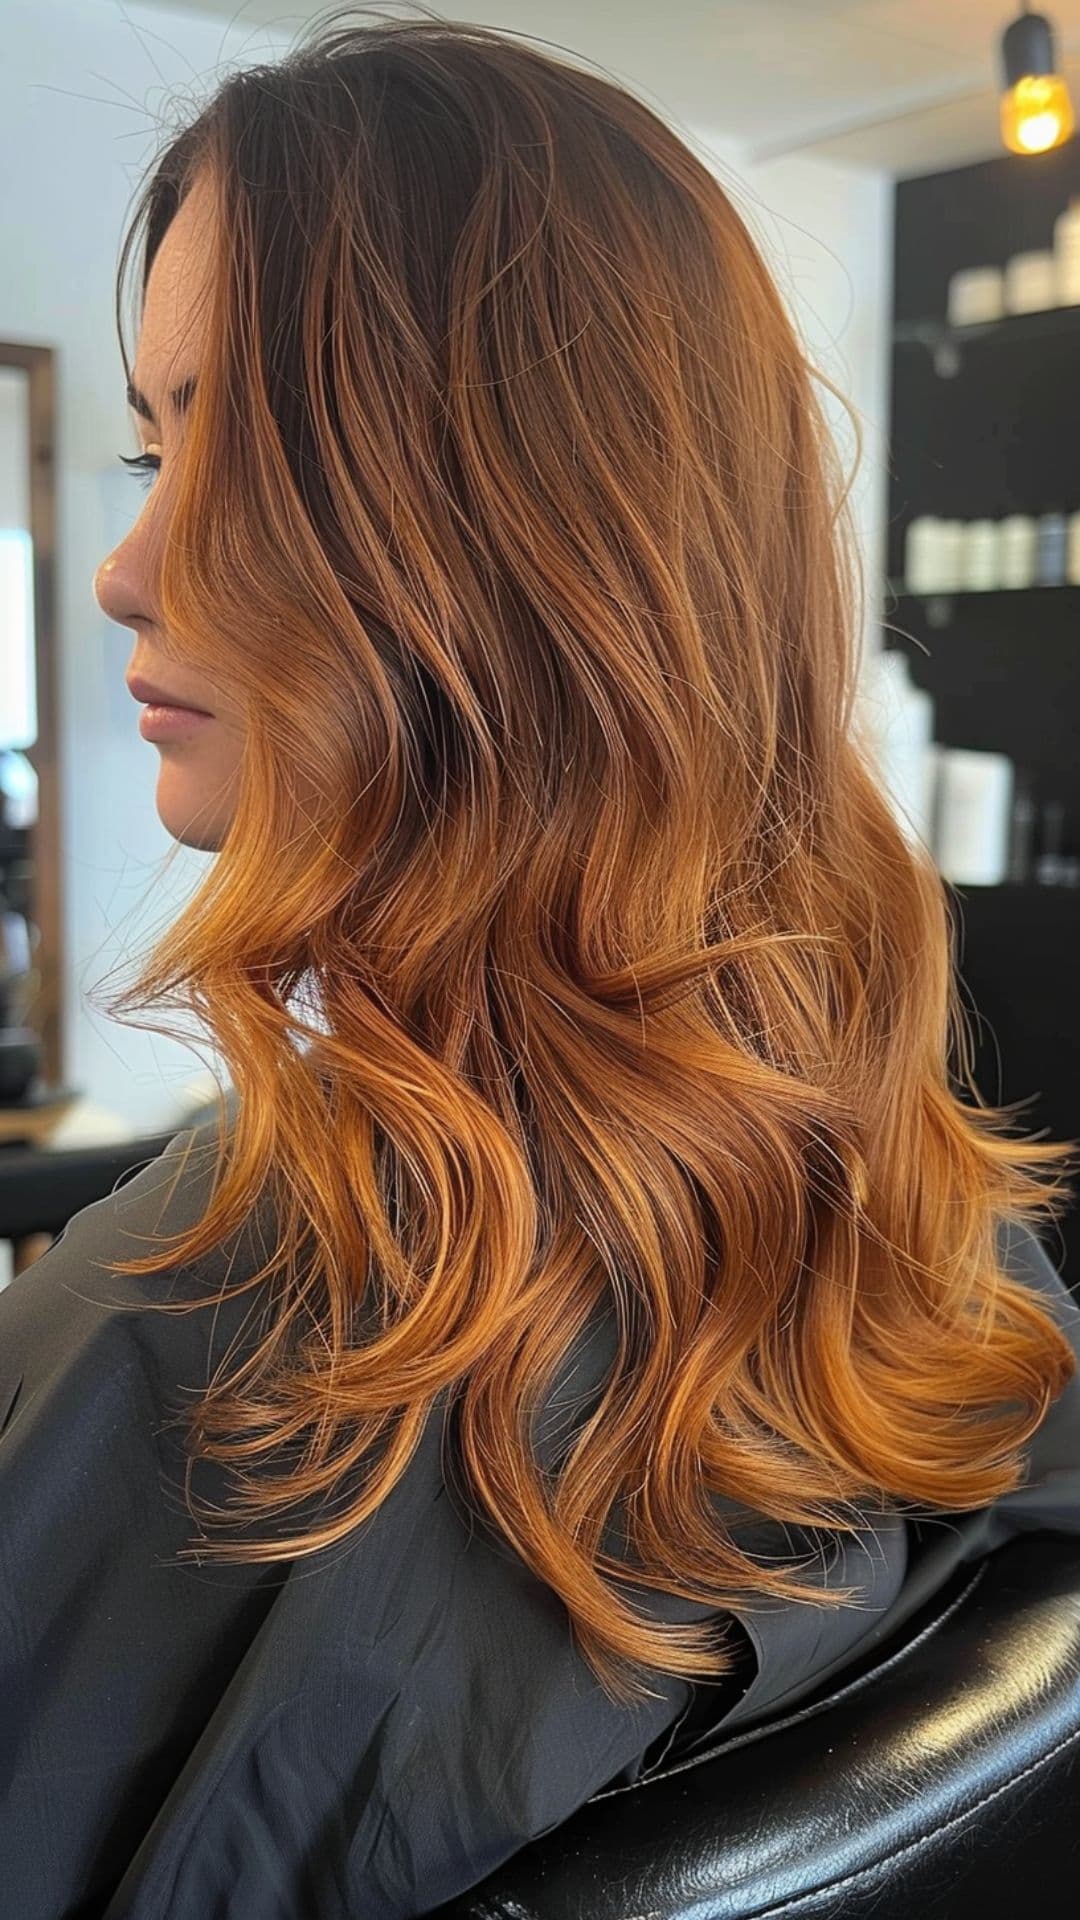 A woman modelling a copper ombre hair.